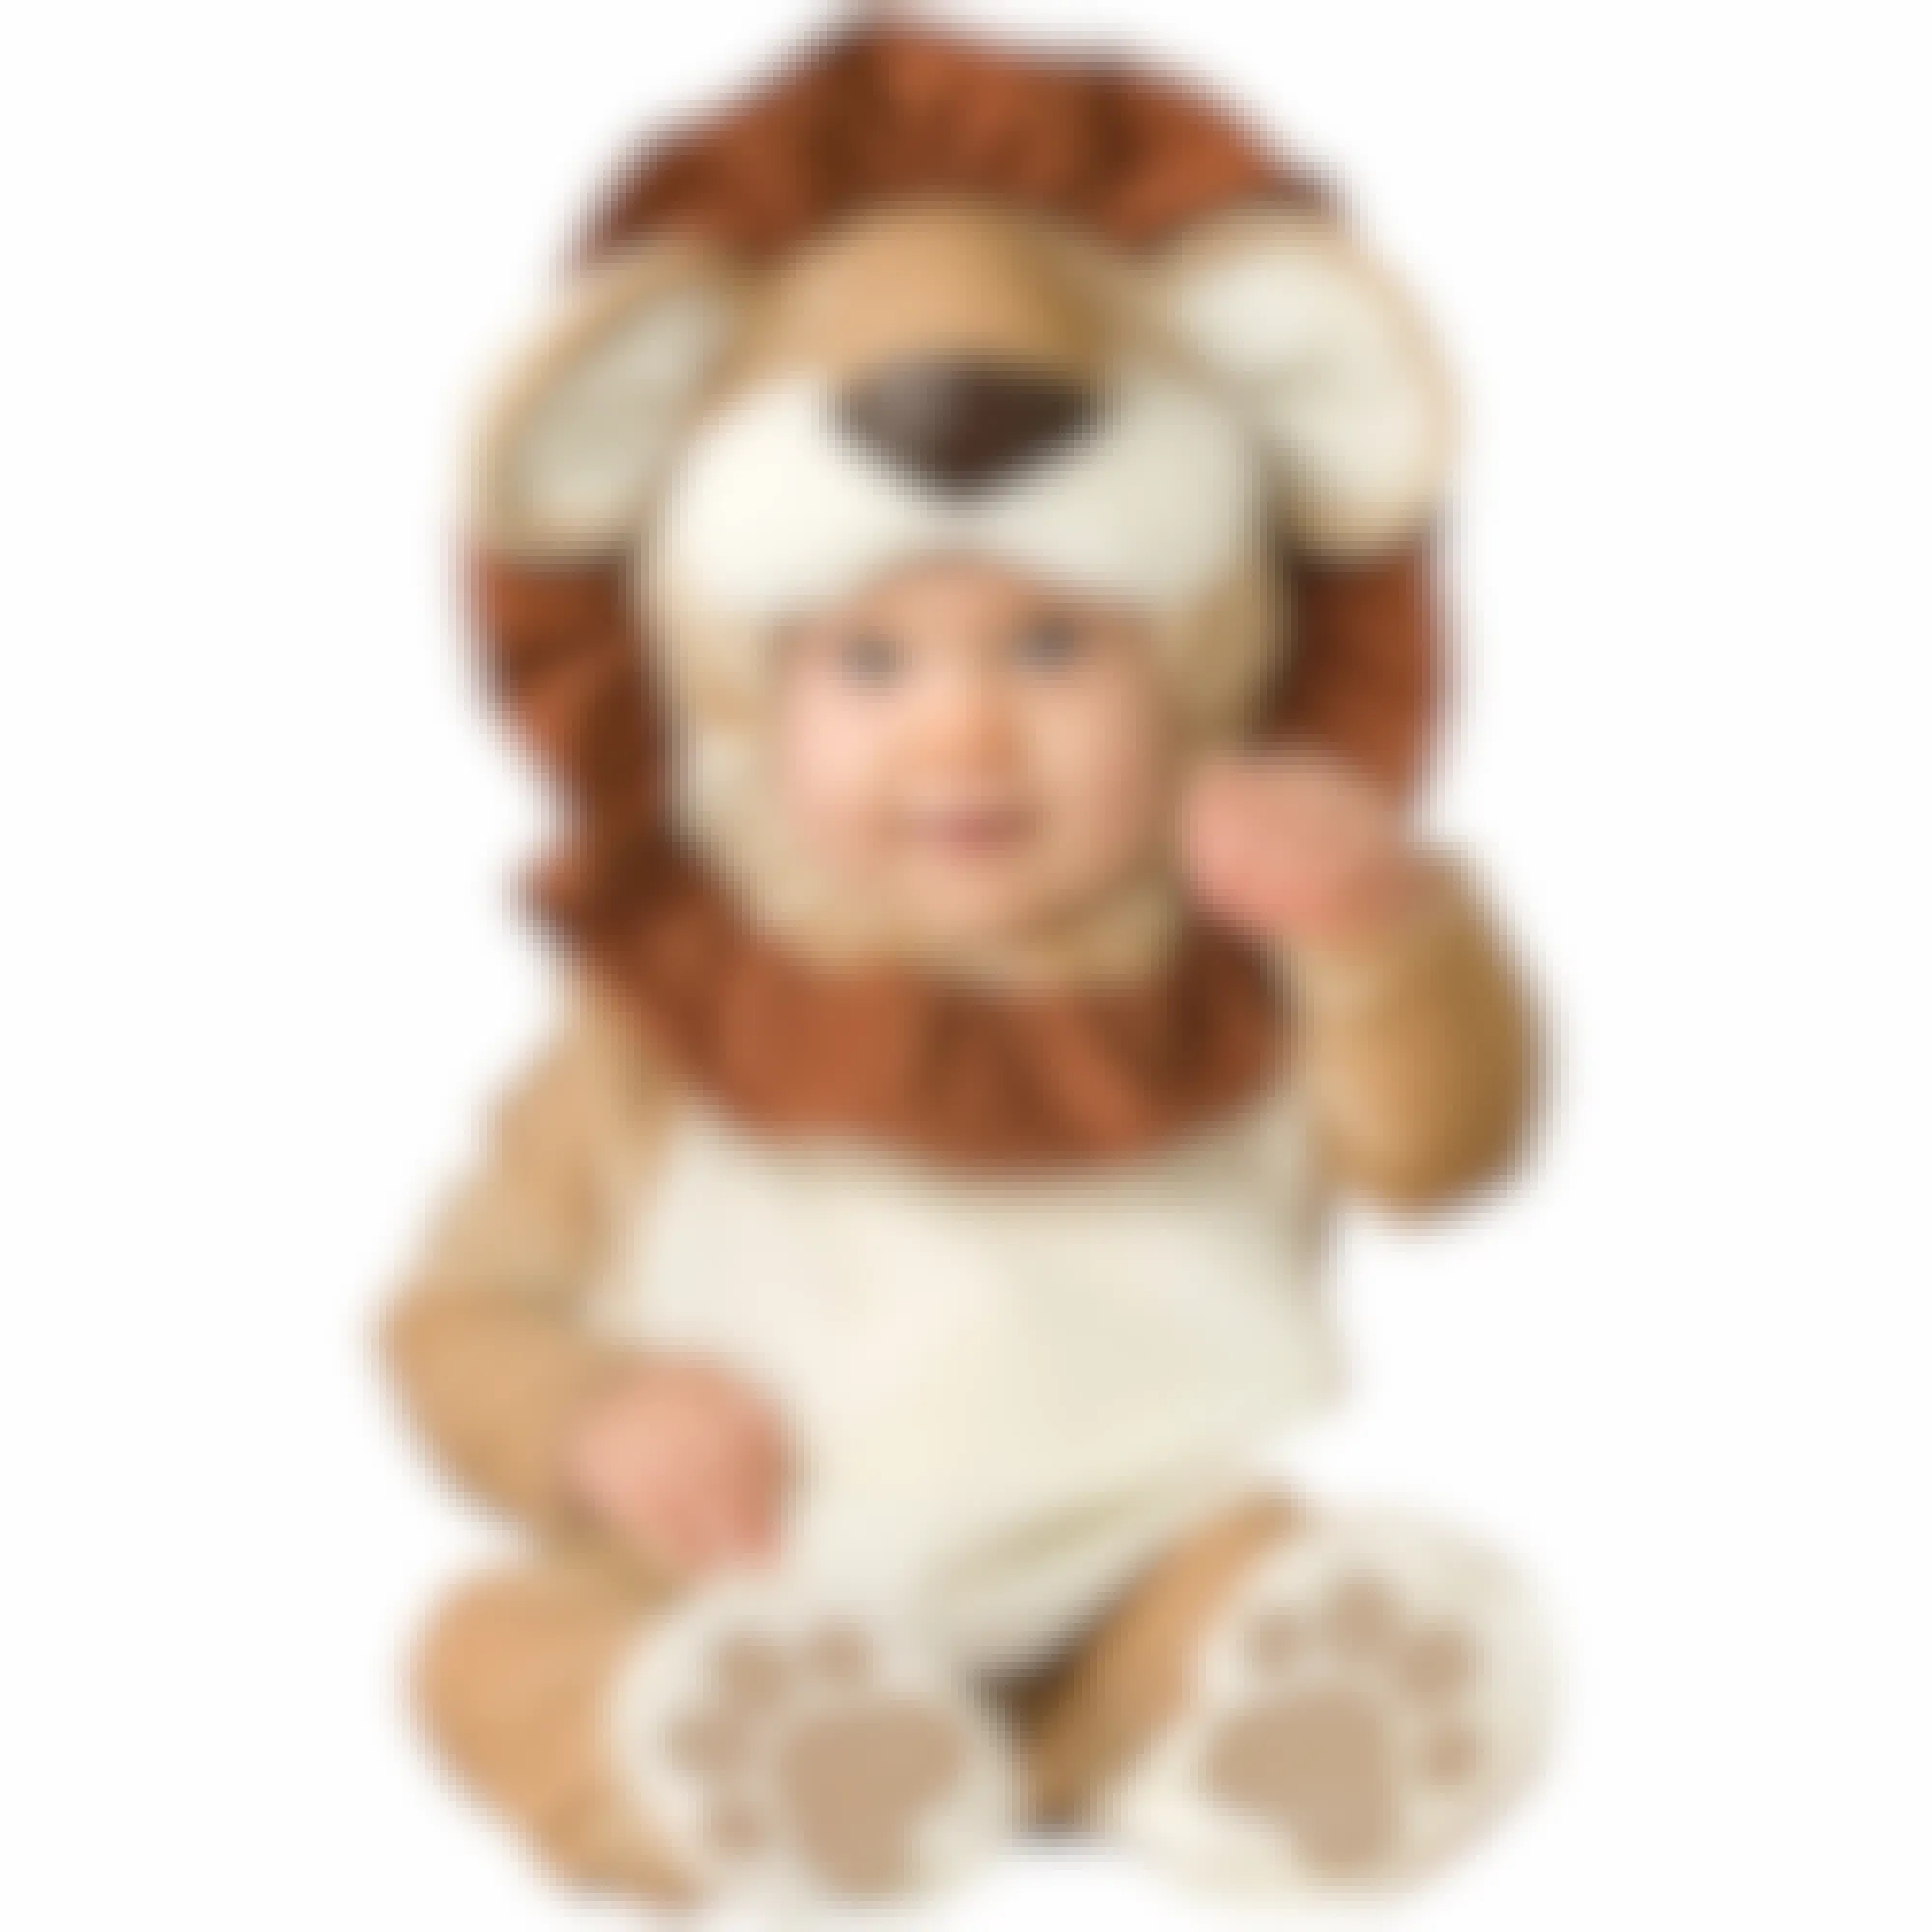 A baby wearing a lion costume on a white background.